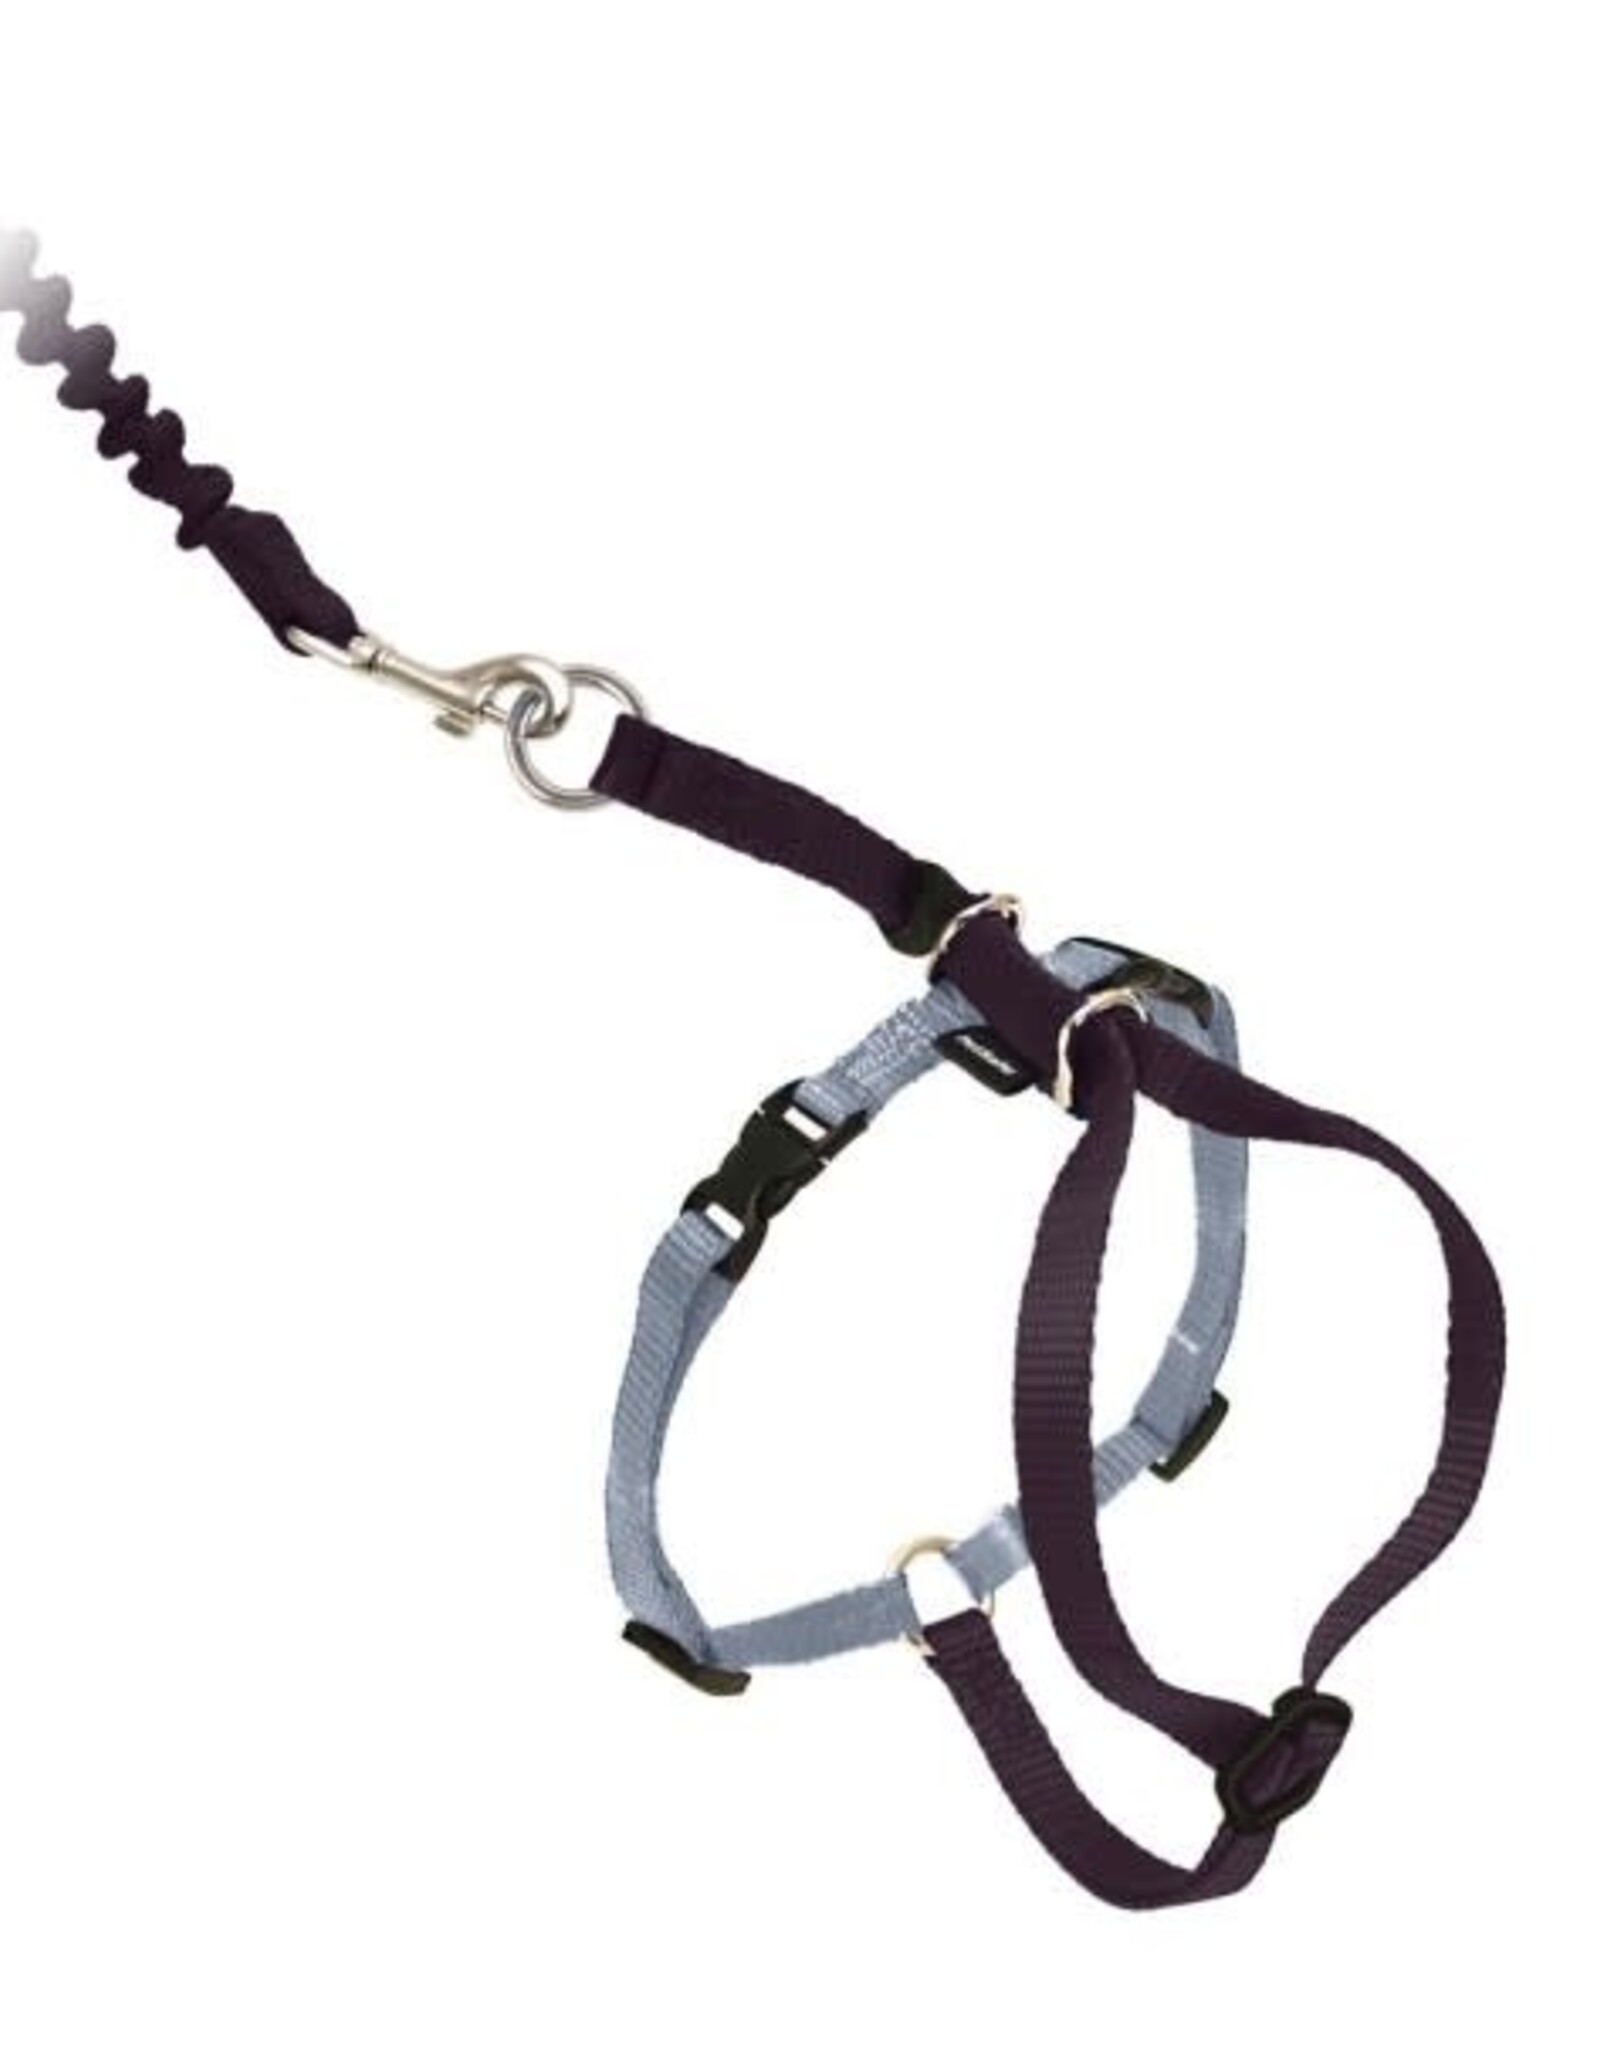 RADIO SYSTEMS CORP(PET SAFE) Come With Me Kitty Harness & Bungee Leash Medium Black